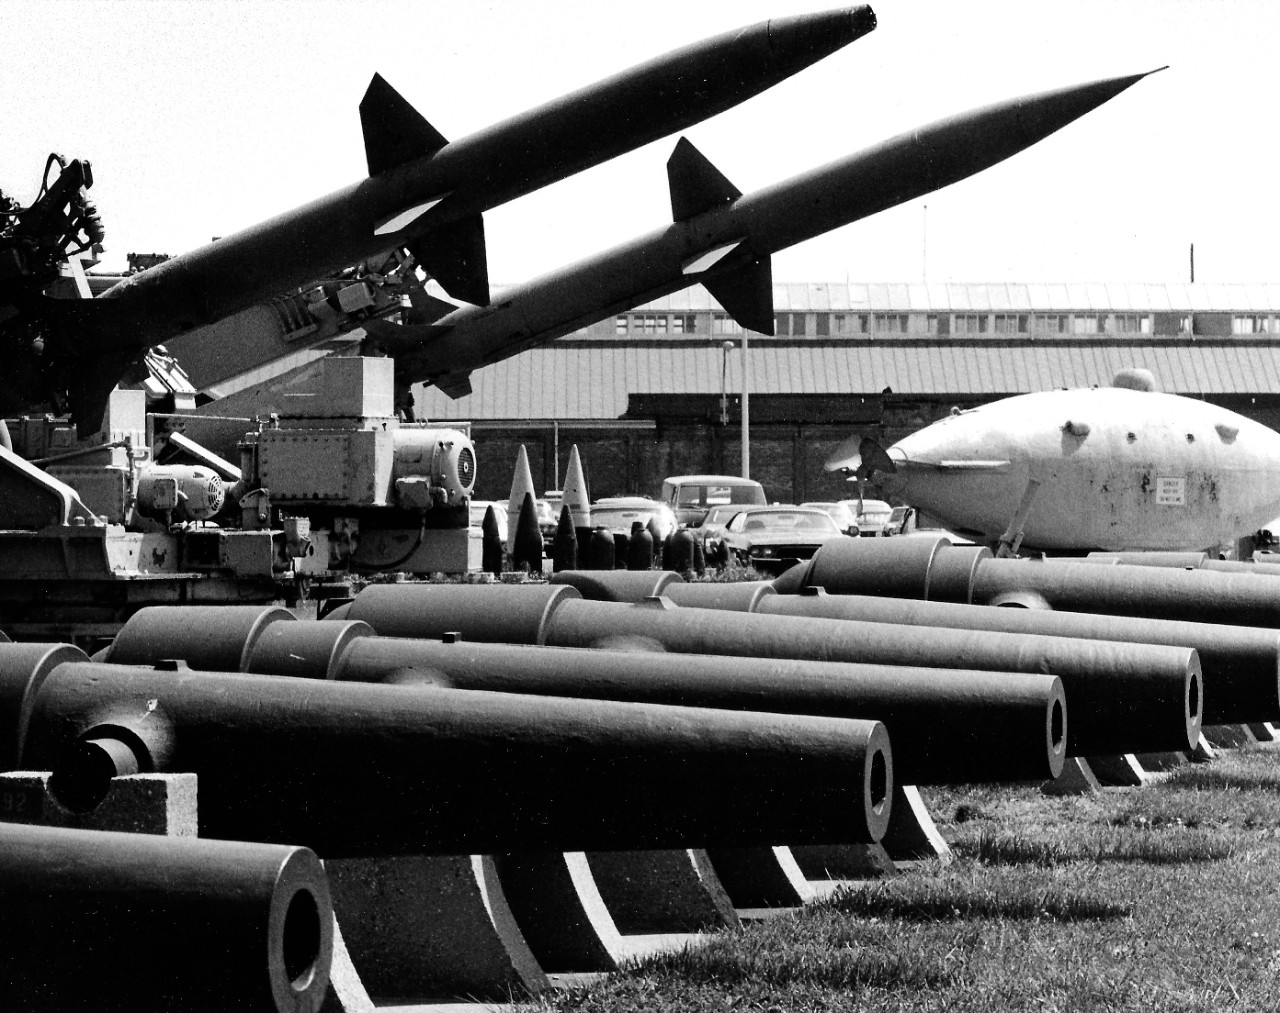 NMUSN-154:  Willard Park, Washington Navy Yard, Washington, D.C. 1970s.  Smooth-bore cannons forefront; Terrier Missiles in the back, with the submersible Intelligent Whale to the right.   National Museum of the U.S. Navy Photograph Collection.  